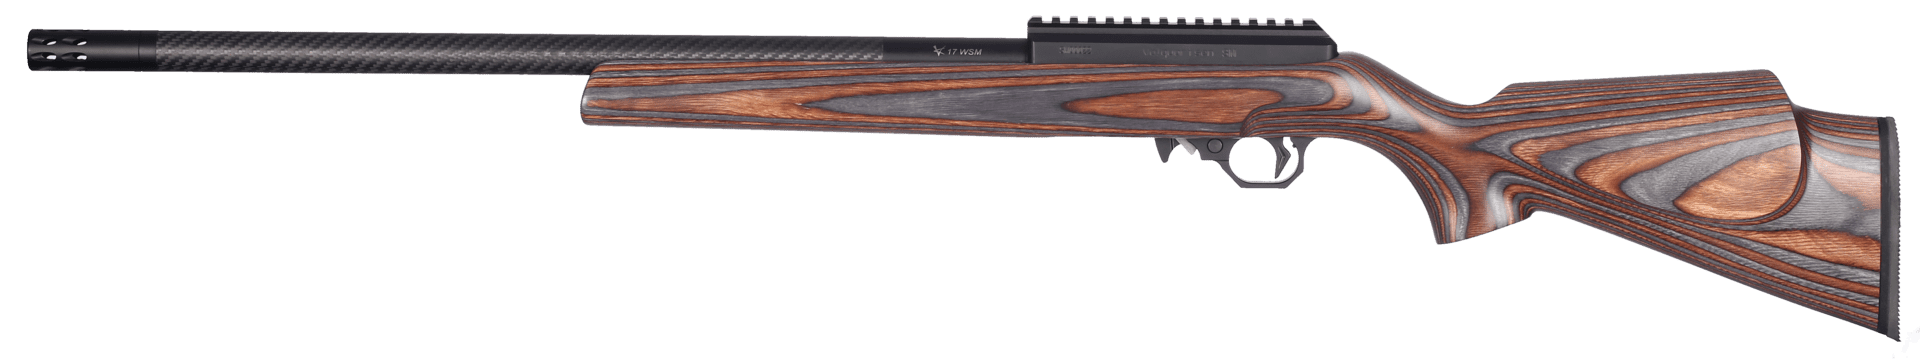 A brown and gray laminated lightweight rifle